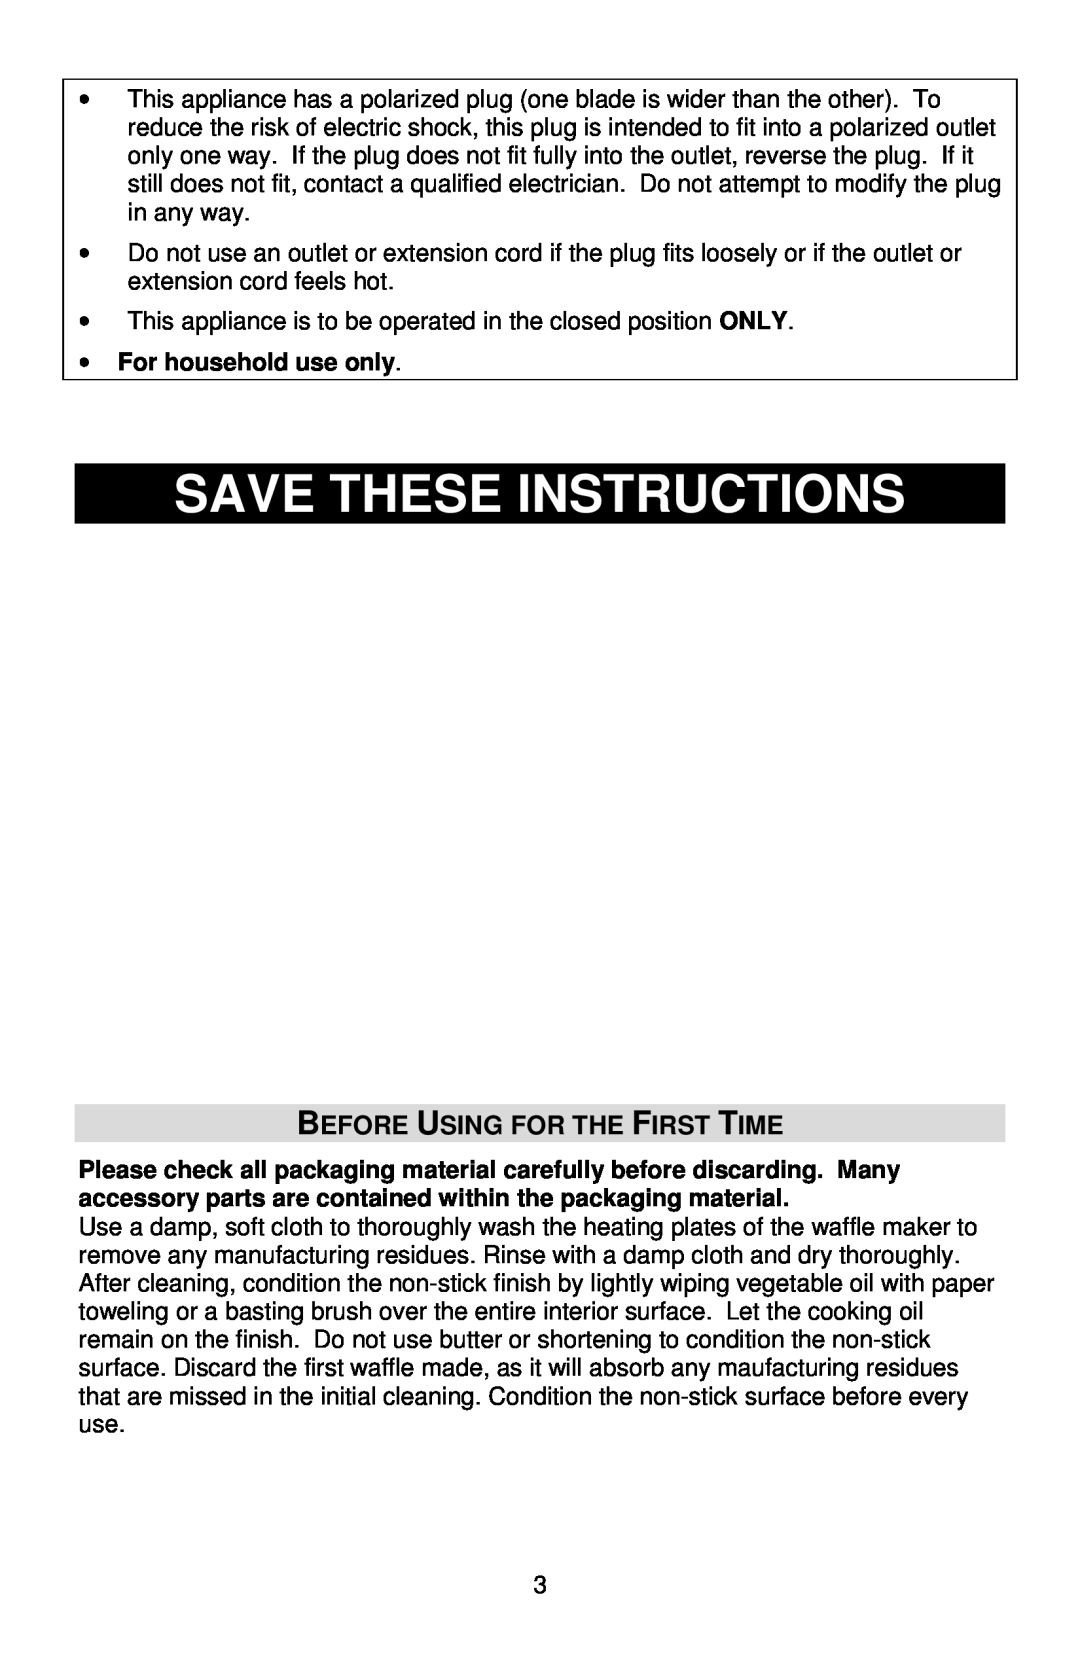 West Bend 6201 instruction manual Save These Instructions, Before Using For The First Time, For household use only 